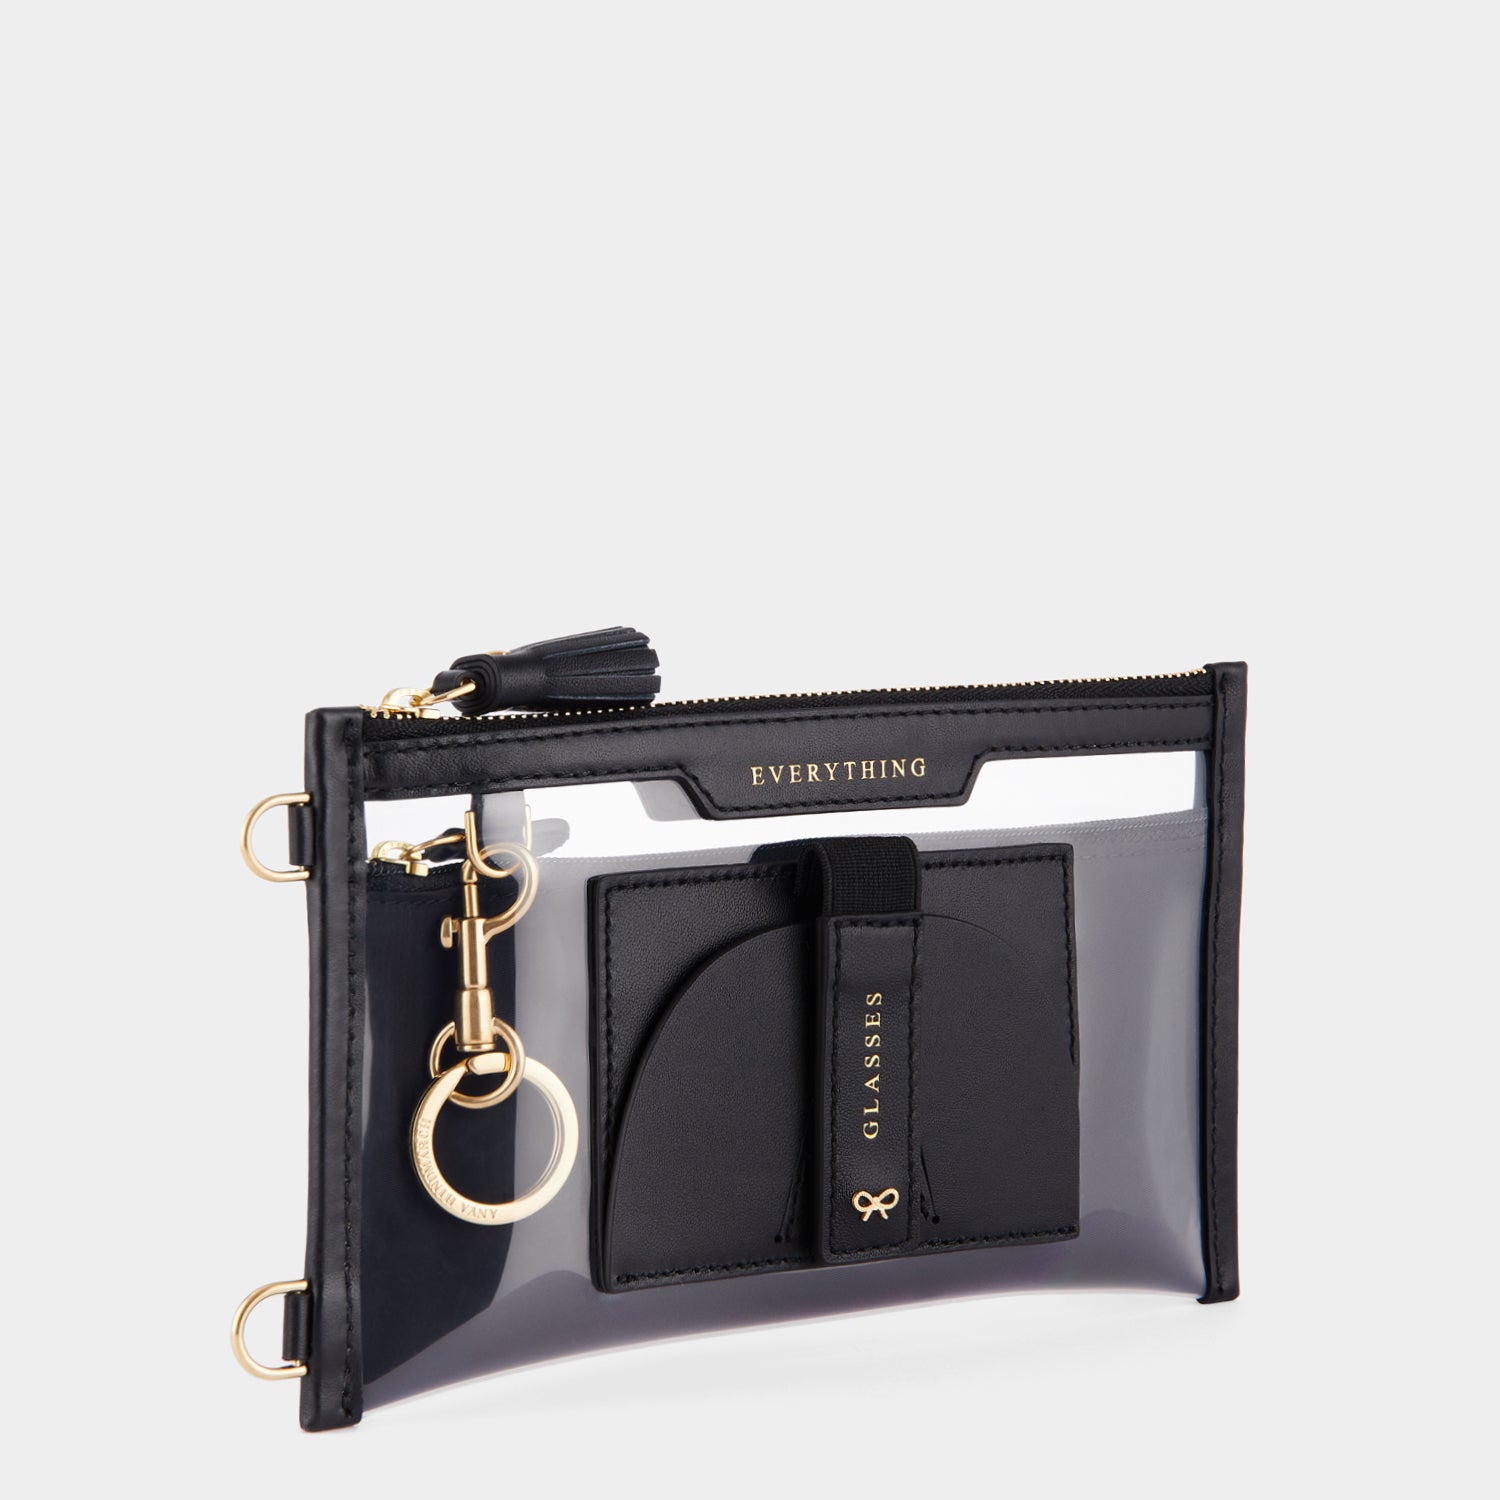 ANYA HINDMARCH EverythingPouch